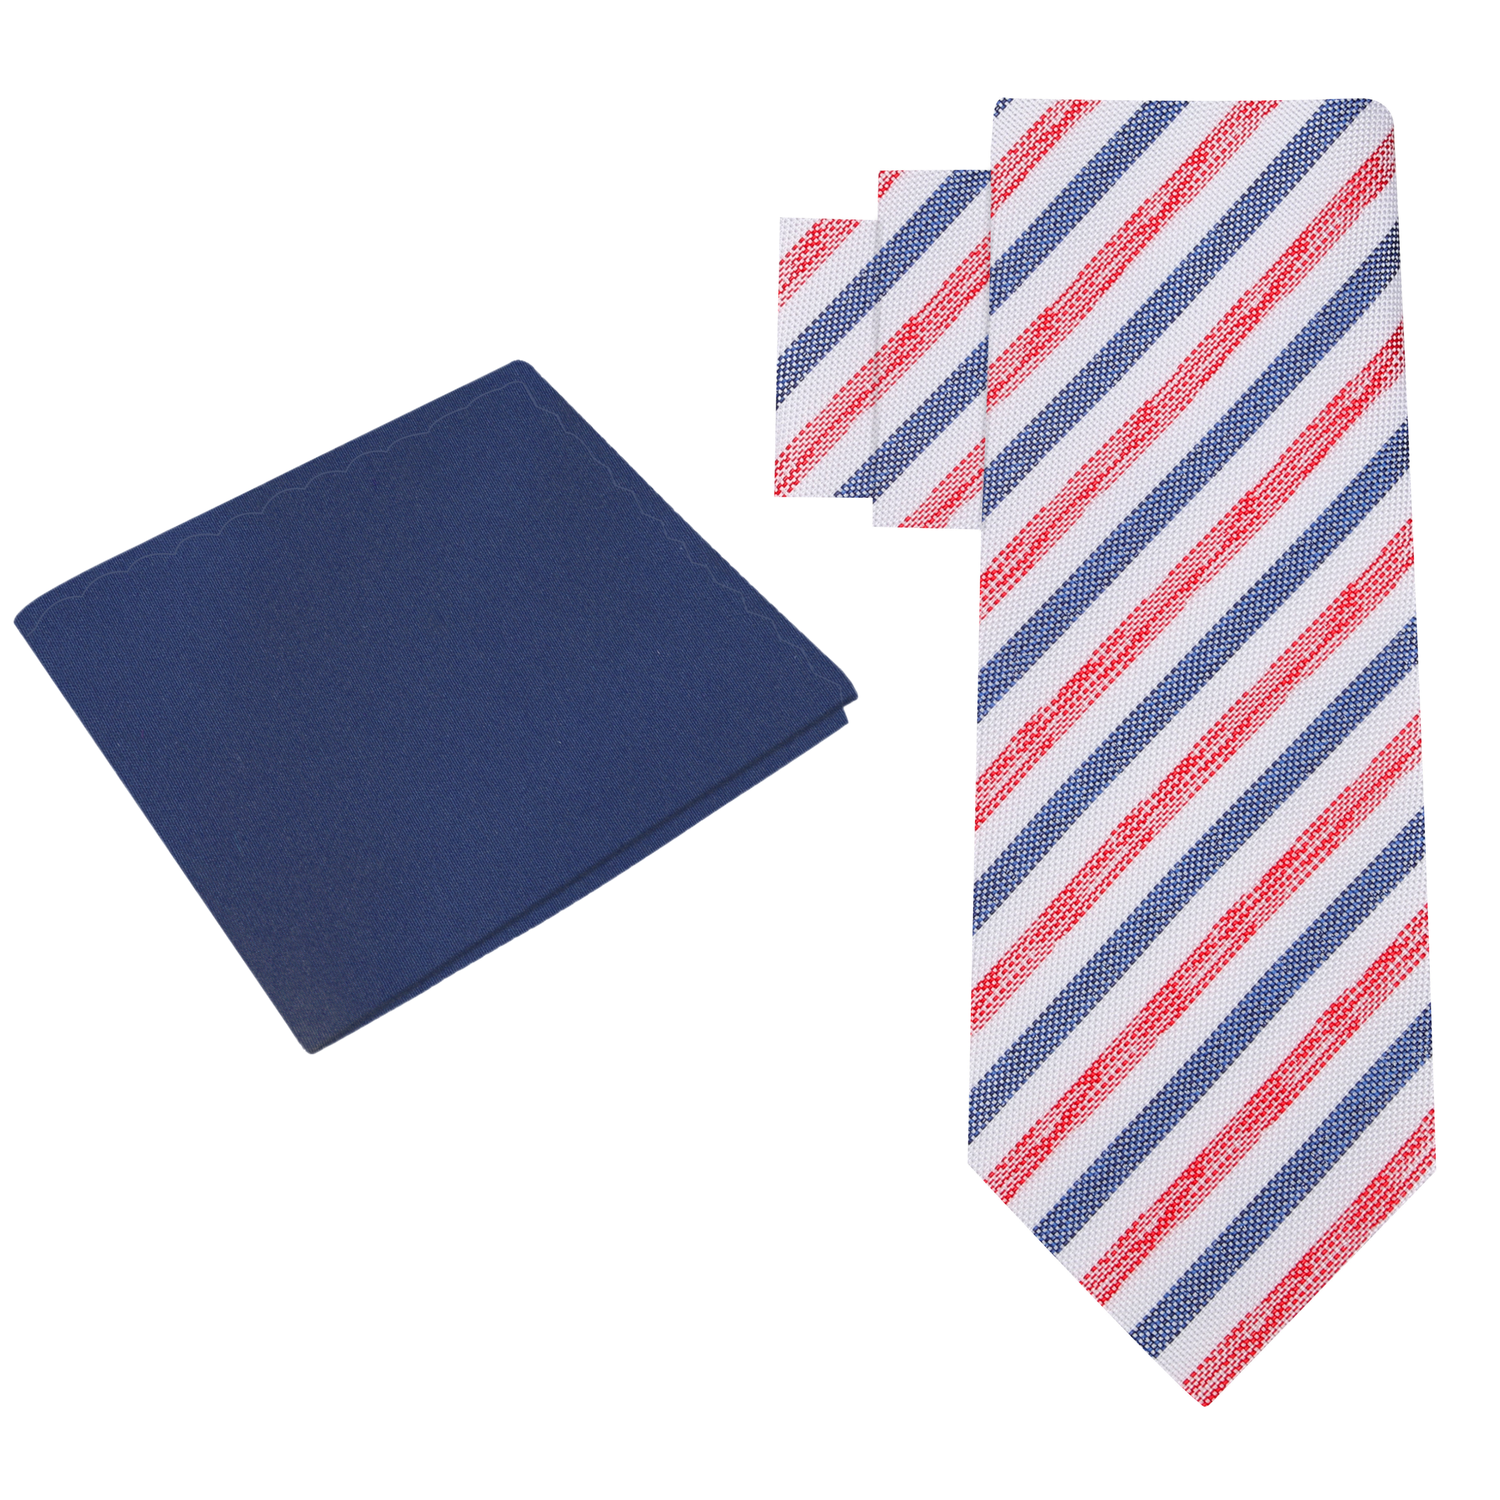 Alt View: White with Blue and Red Stripes Necktie with Blue Square